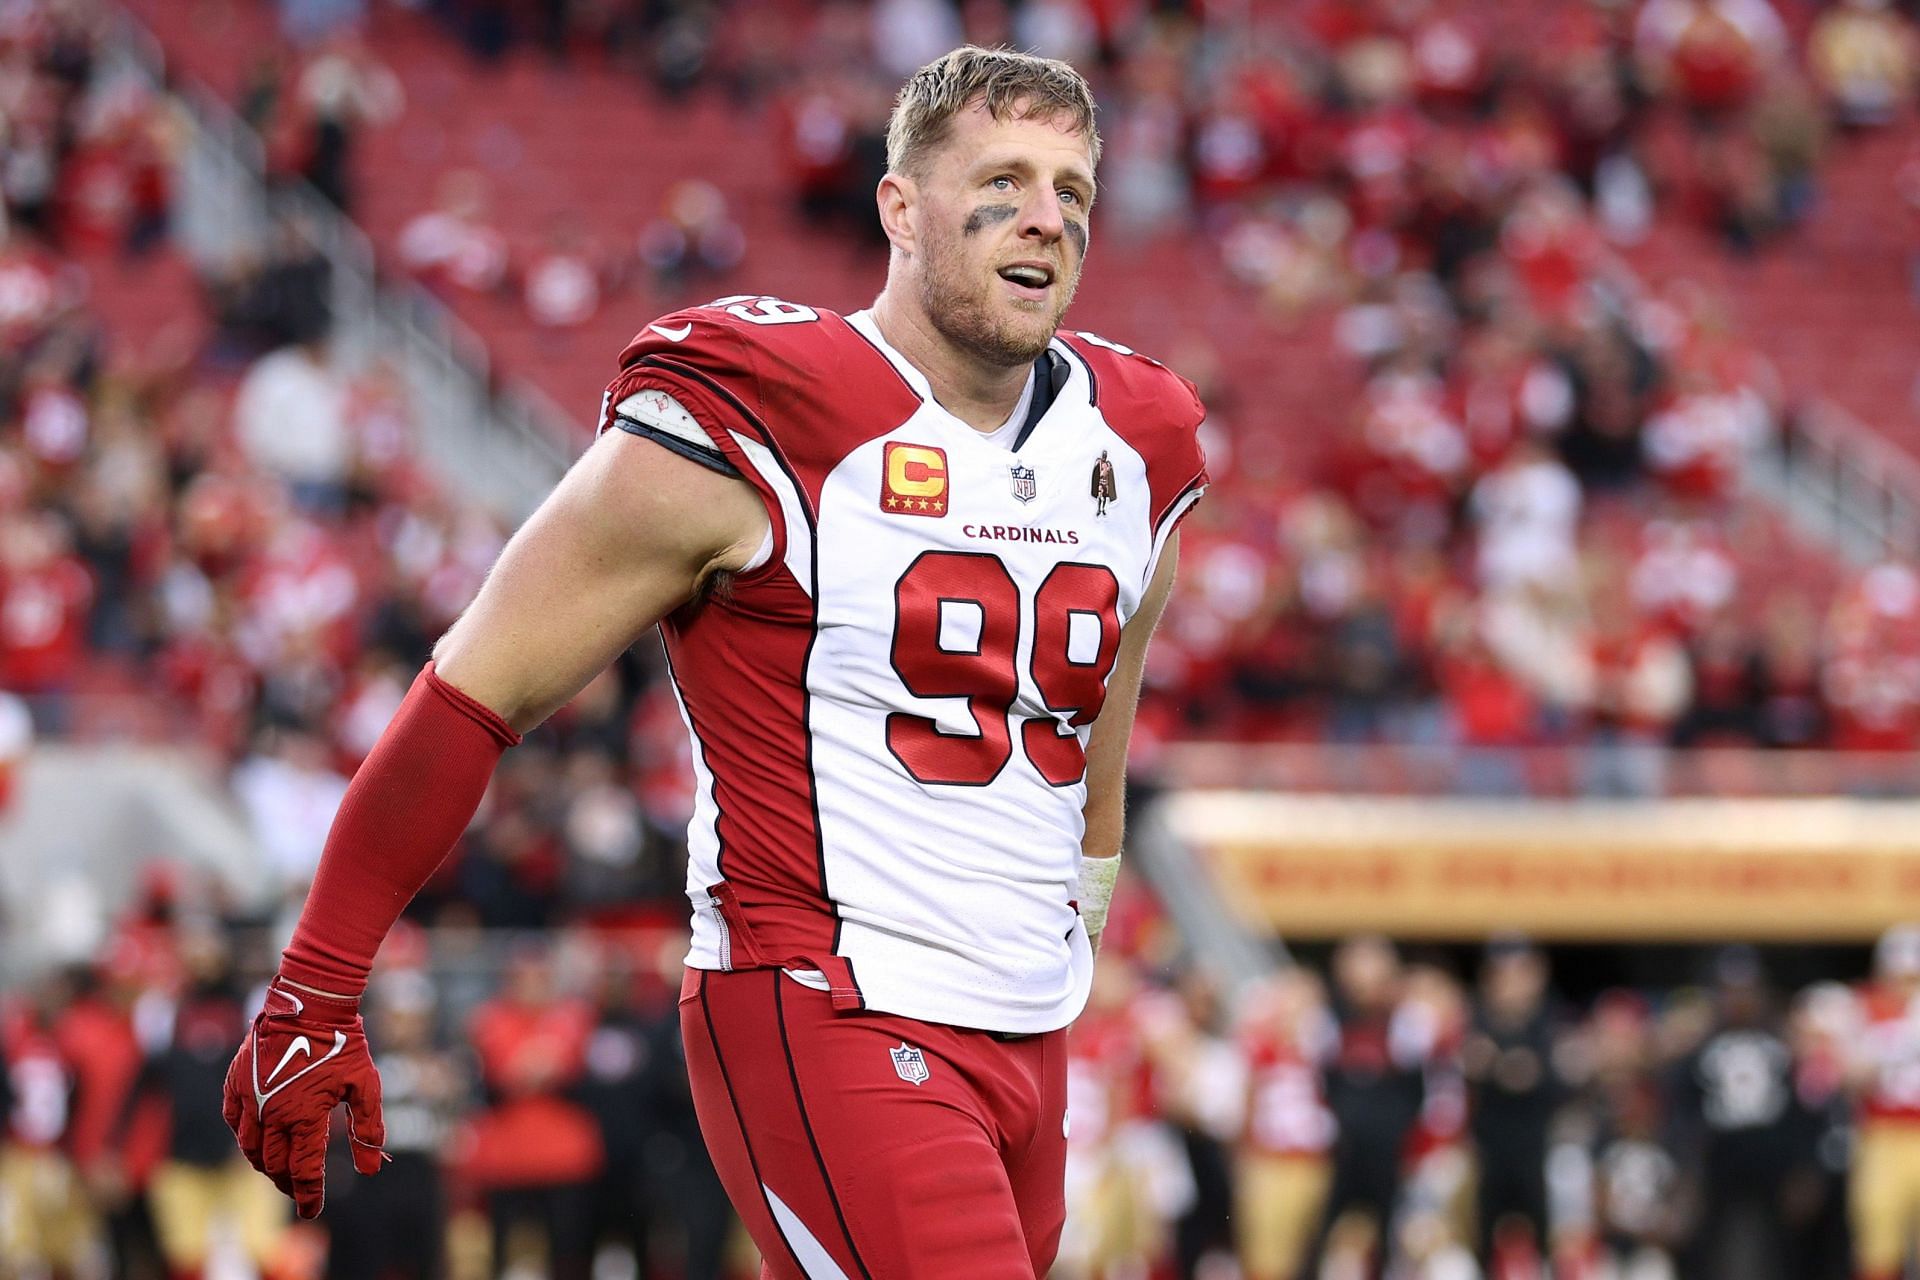 J.J. Watt is looking for new opportunities after his football retirement